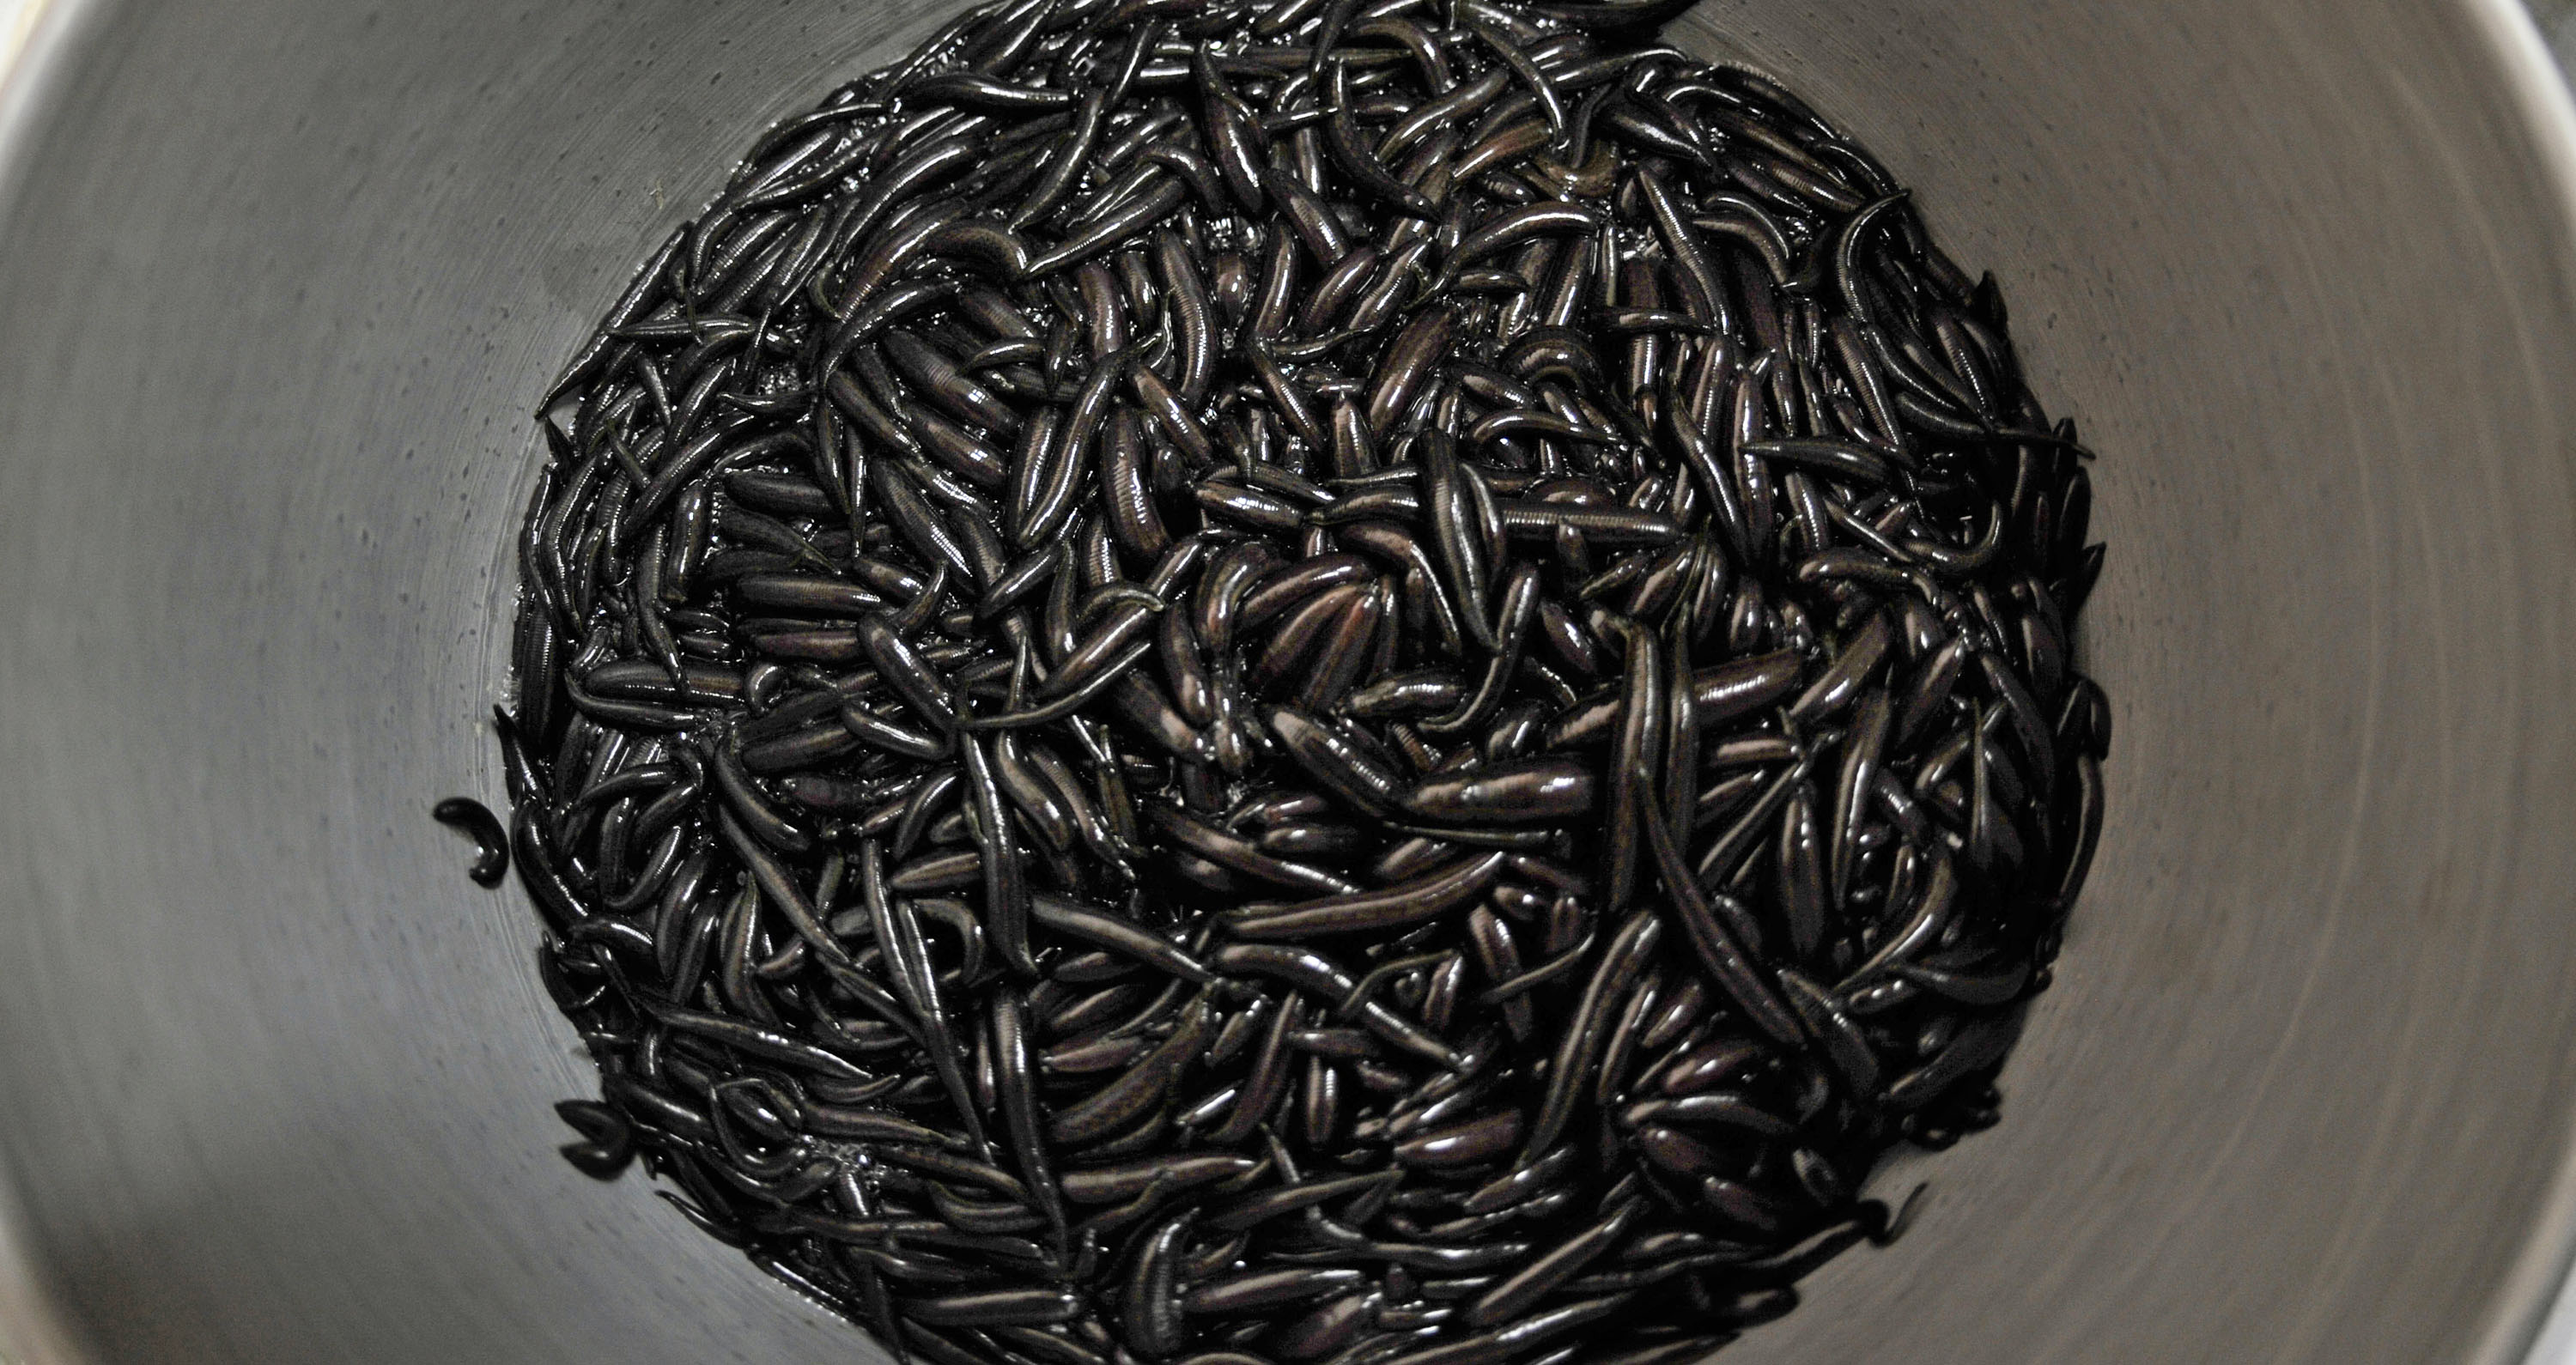 Man smuggles nearly 5,000 leeches into hand luggage on Toronto flight, The  Independent